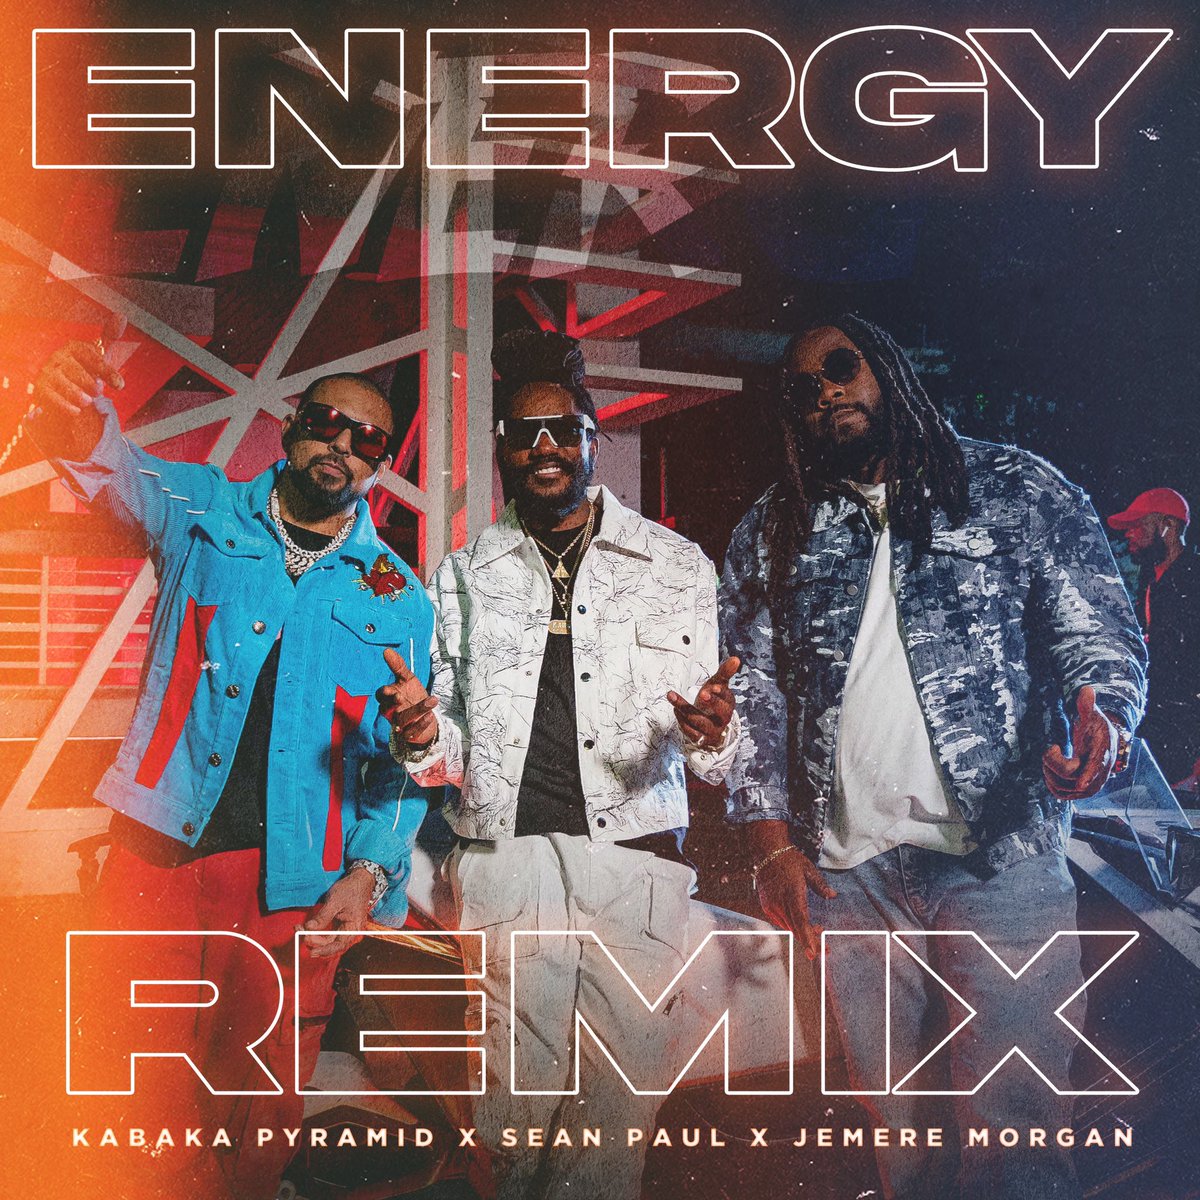 ENERGY REMIX out tomorrow!!! KP x @duttypaul x @iamjemere Single and Video! Get ready!